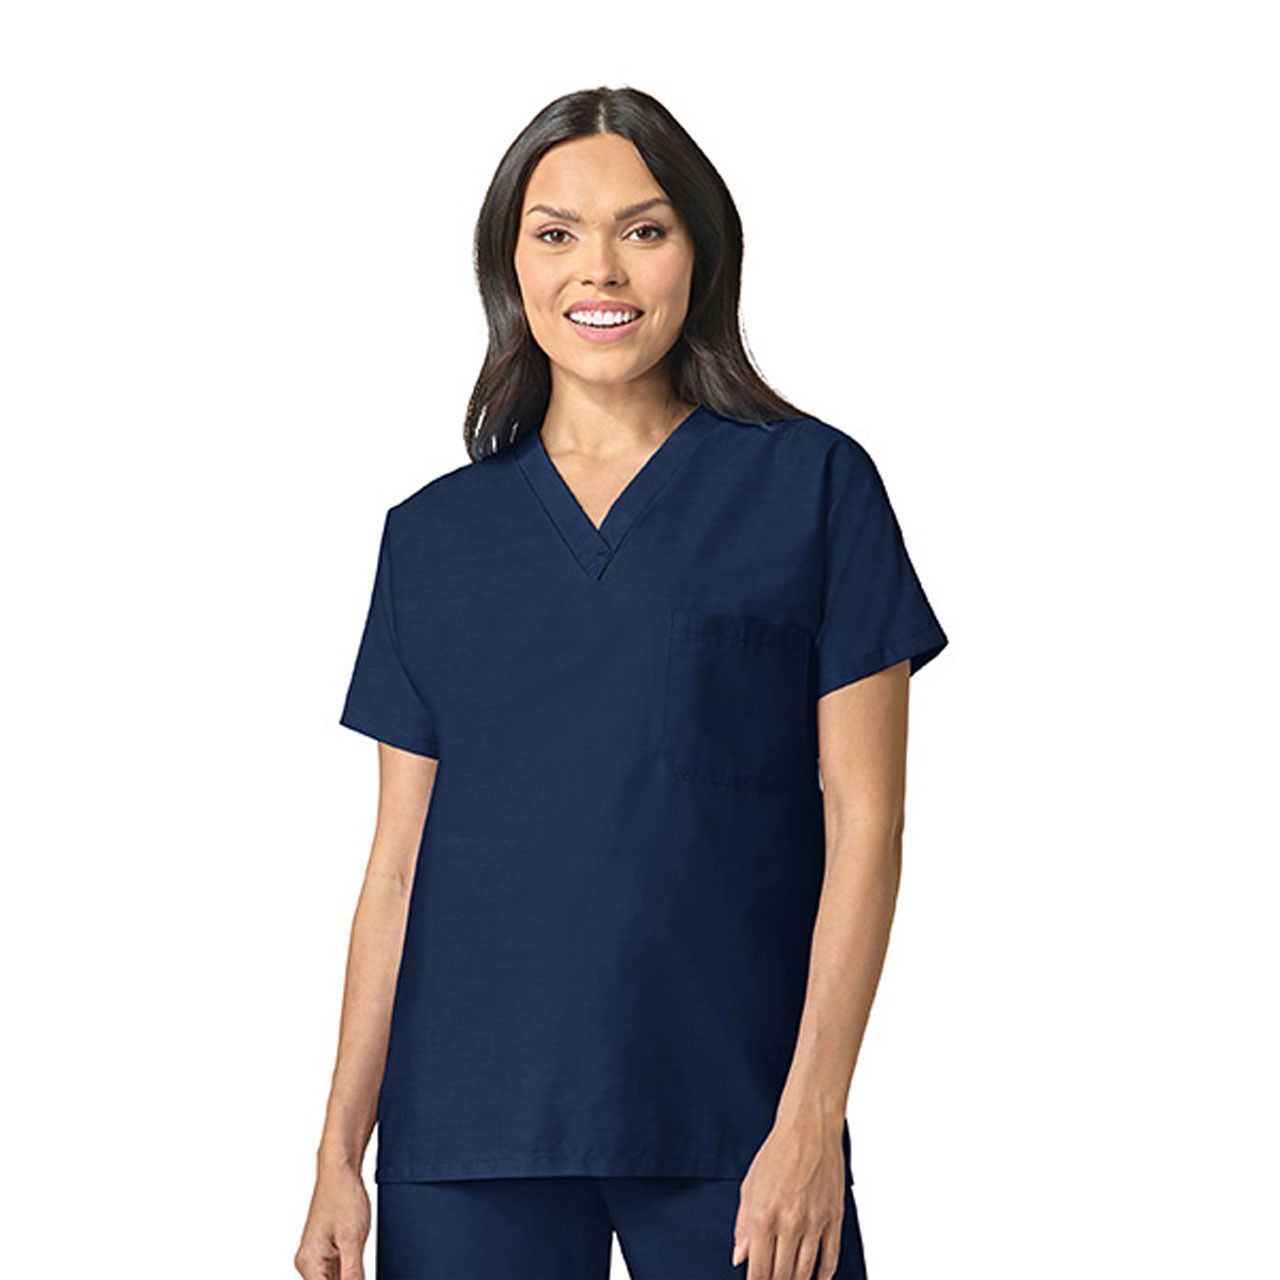 Can the V Neck Scrub Top be worn in different situations?